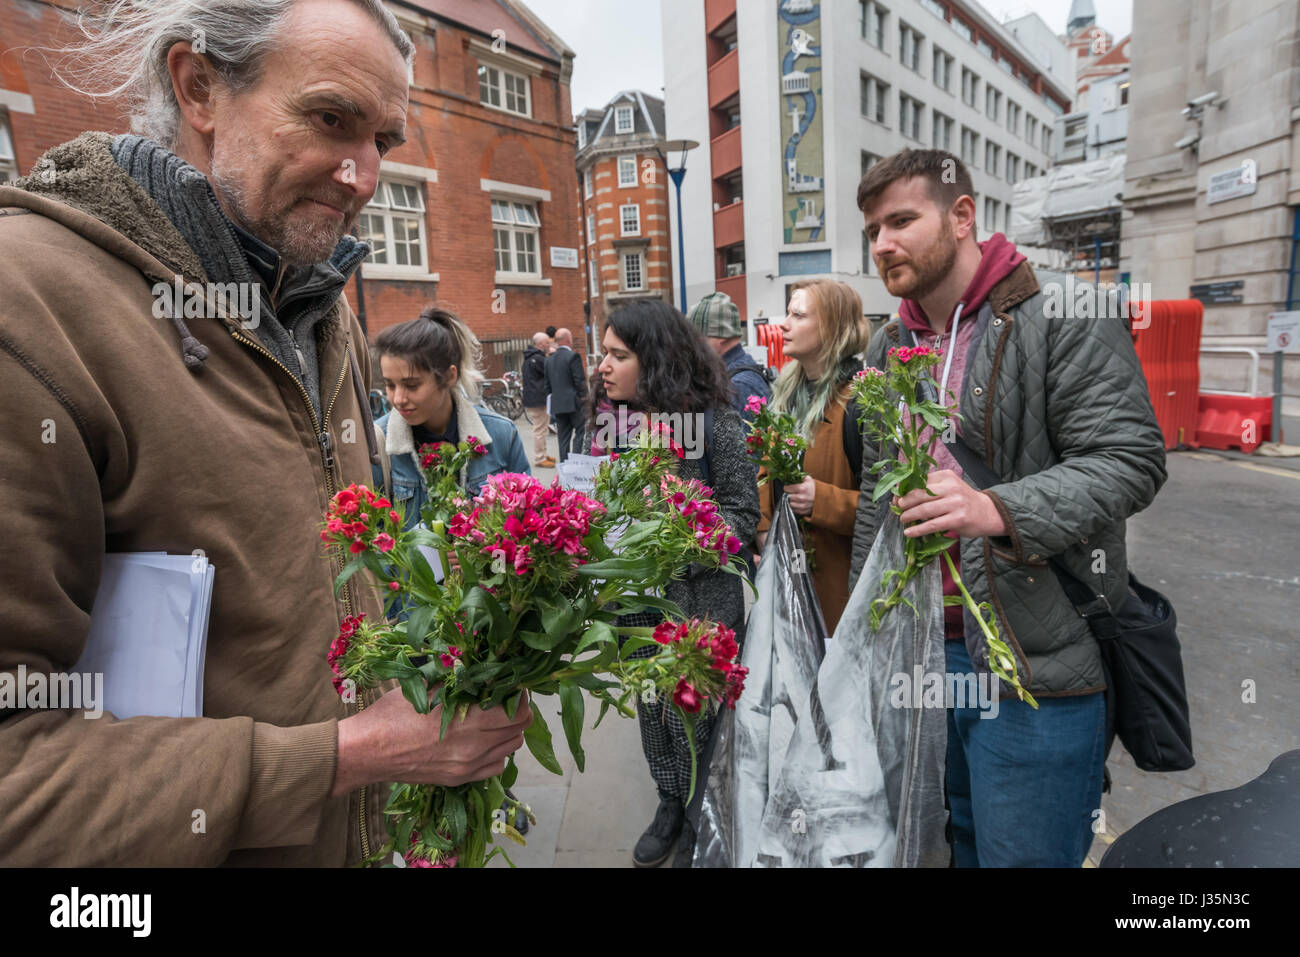 London, UK. 3rd May 2017. Roger Hallam and ohter protesters at the end of the latest protest calling on the LSE to put the equality at the root of its teaching into practice for the low paid workers at the LSE. A man was arrested for so-called 'criminal damage', writing on a wall with wipe-clean chalk spray. He was tackled bodily by a LSE security guard when only writing the third letter of his intended slogan 'END INEQUALITY AT THE LSE'. Credit: Peter Marshall/Alamy Live News Stock Photo